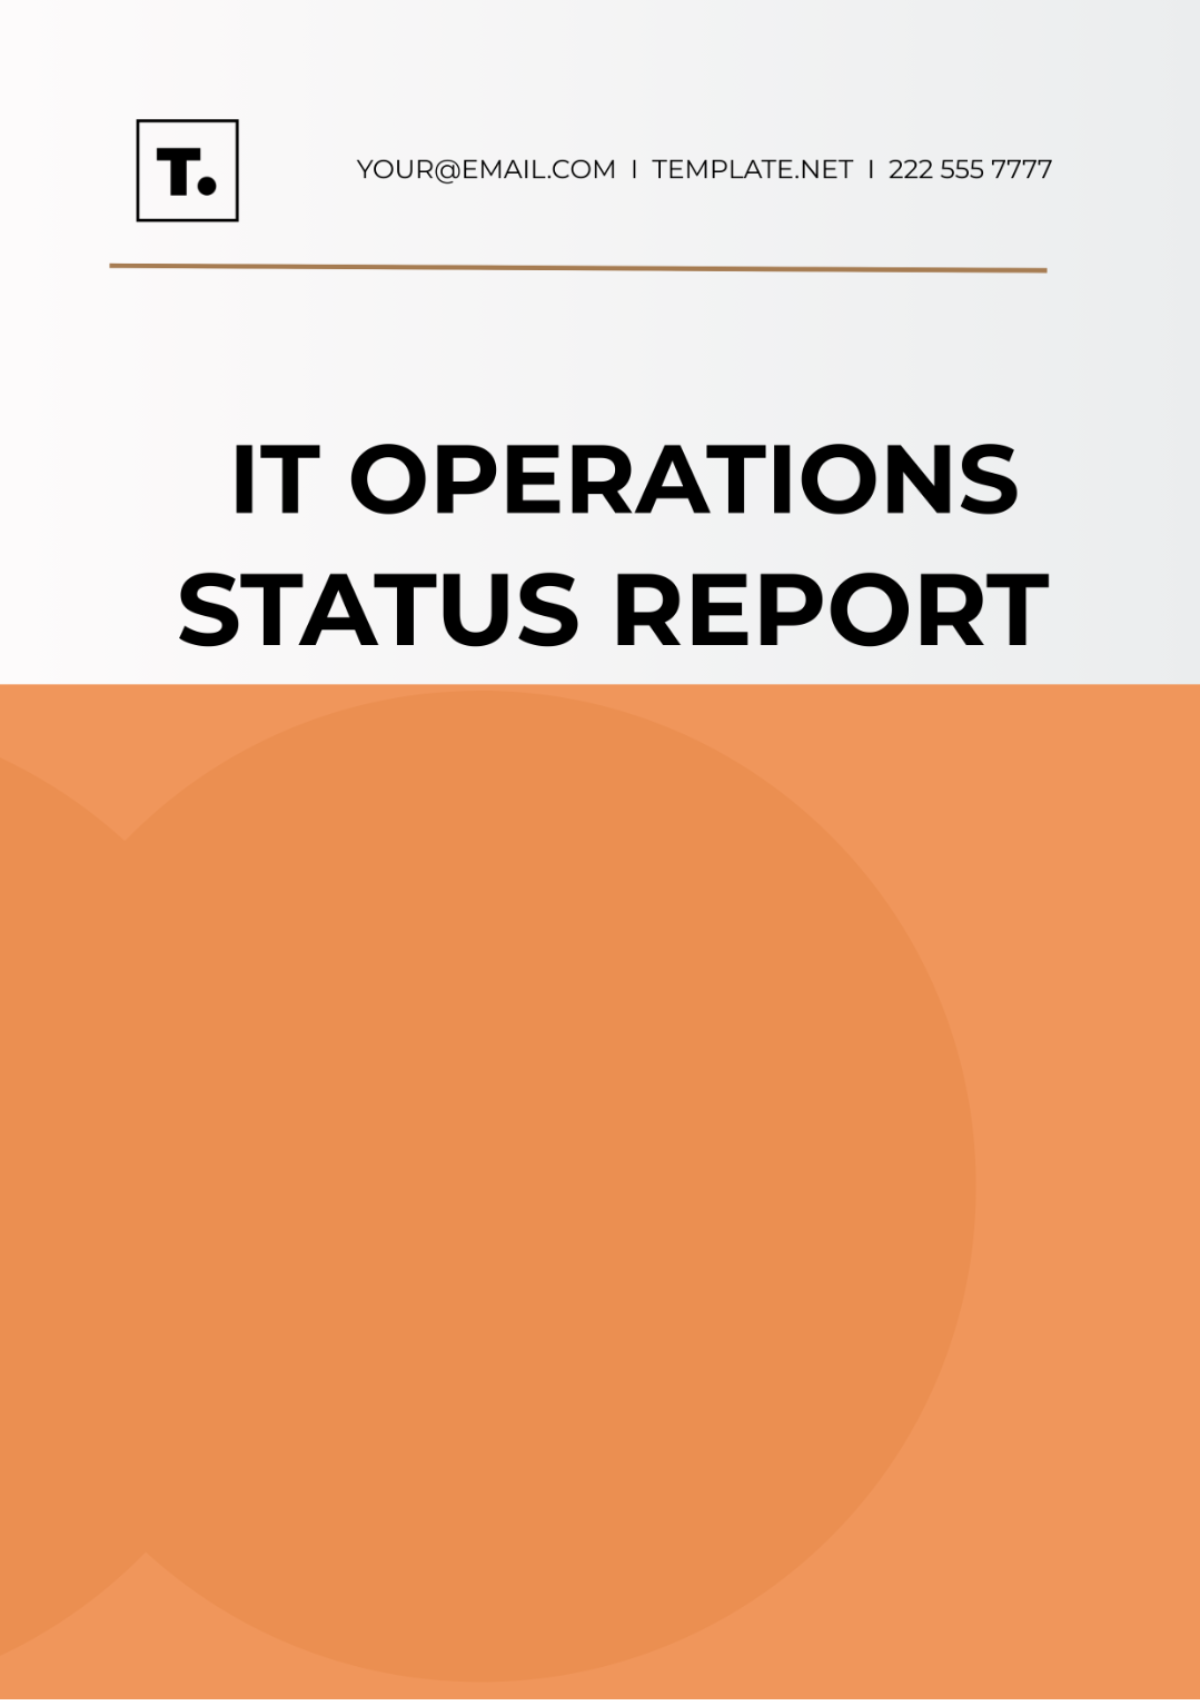 IT Operations Status Report Template